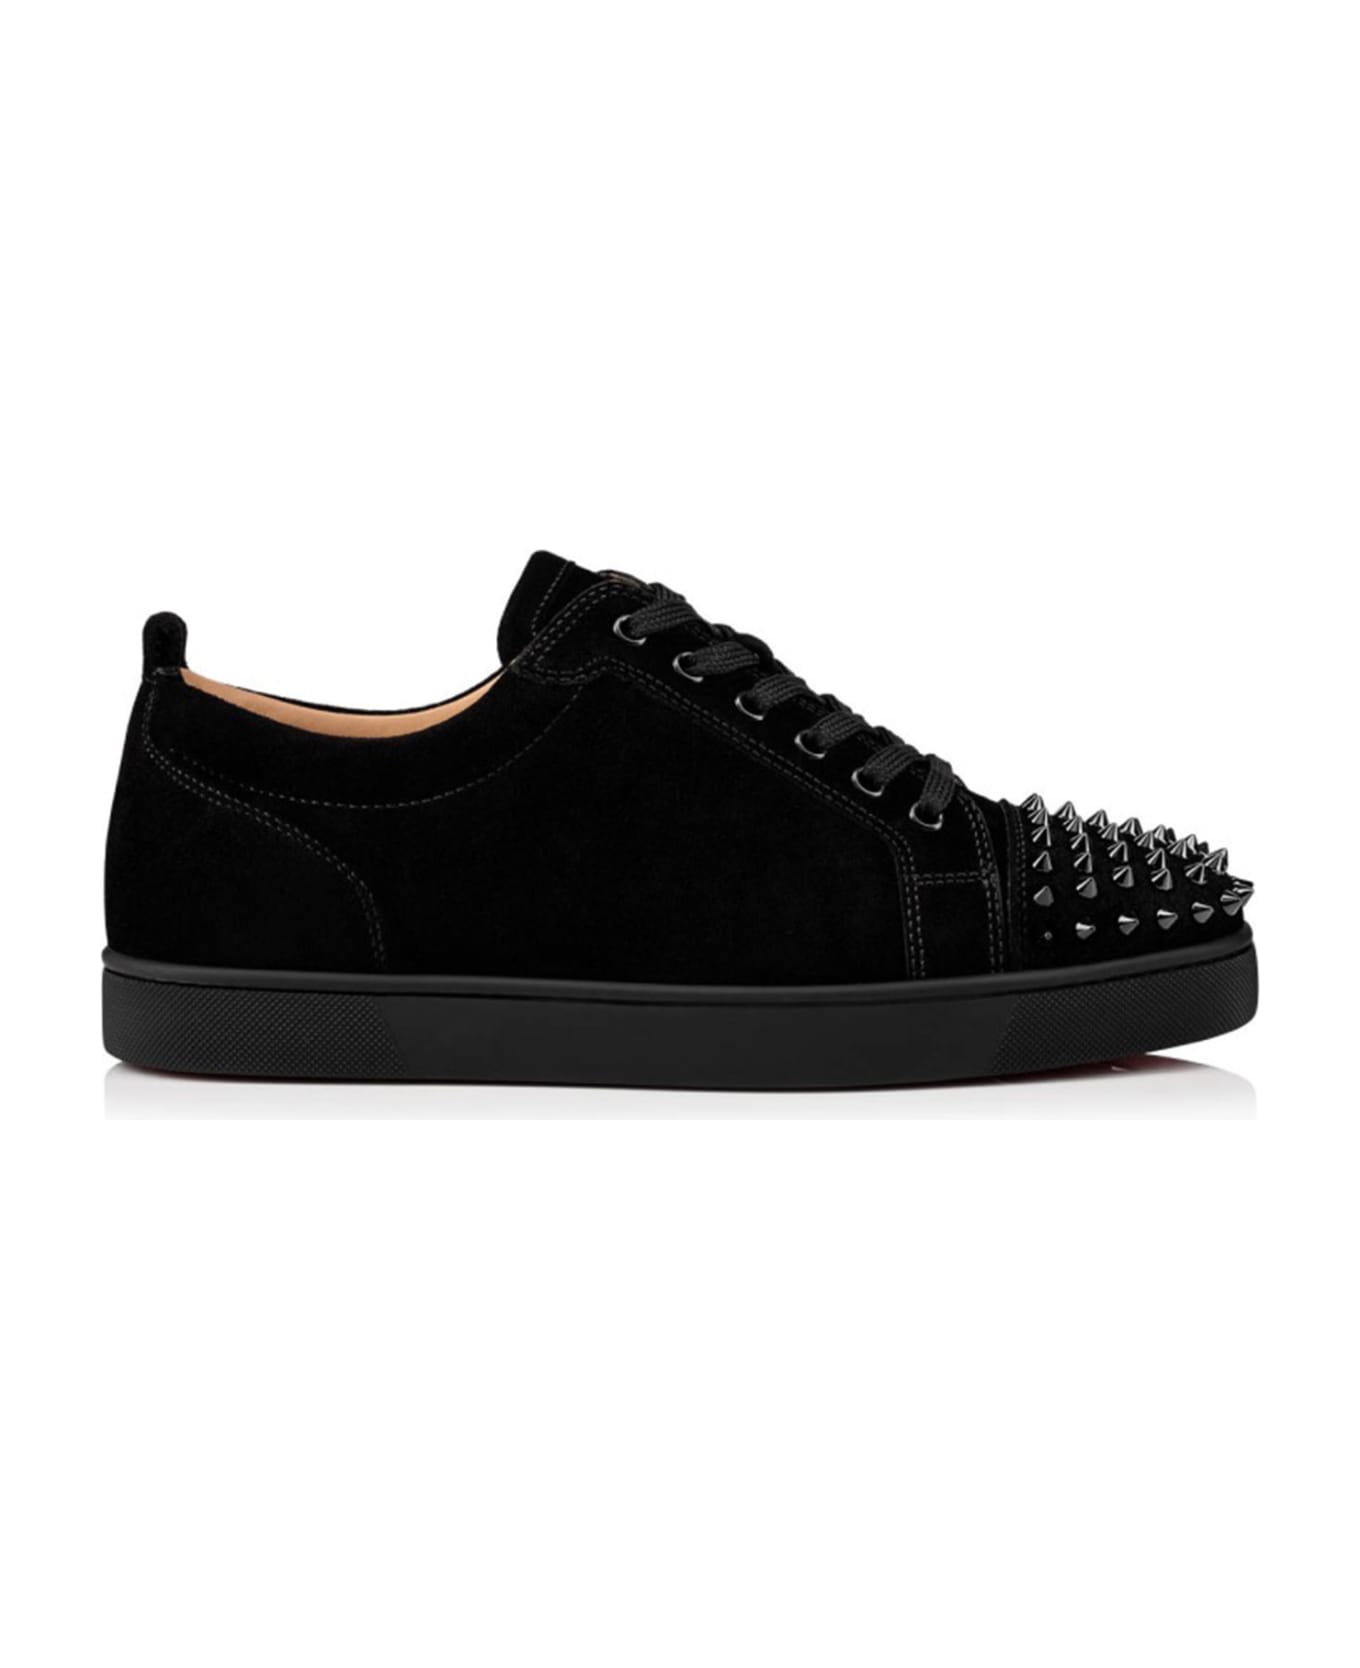 Christian Louboutin Louis Sneakers With Spikes - BLACK BLACK